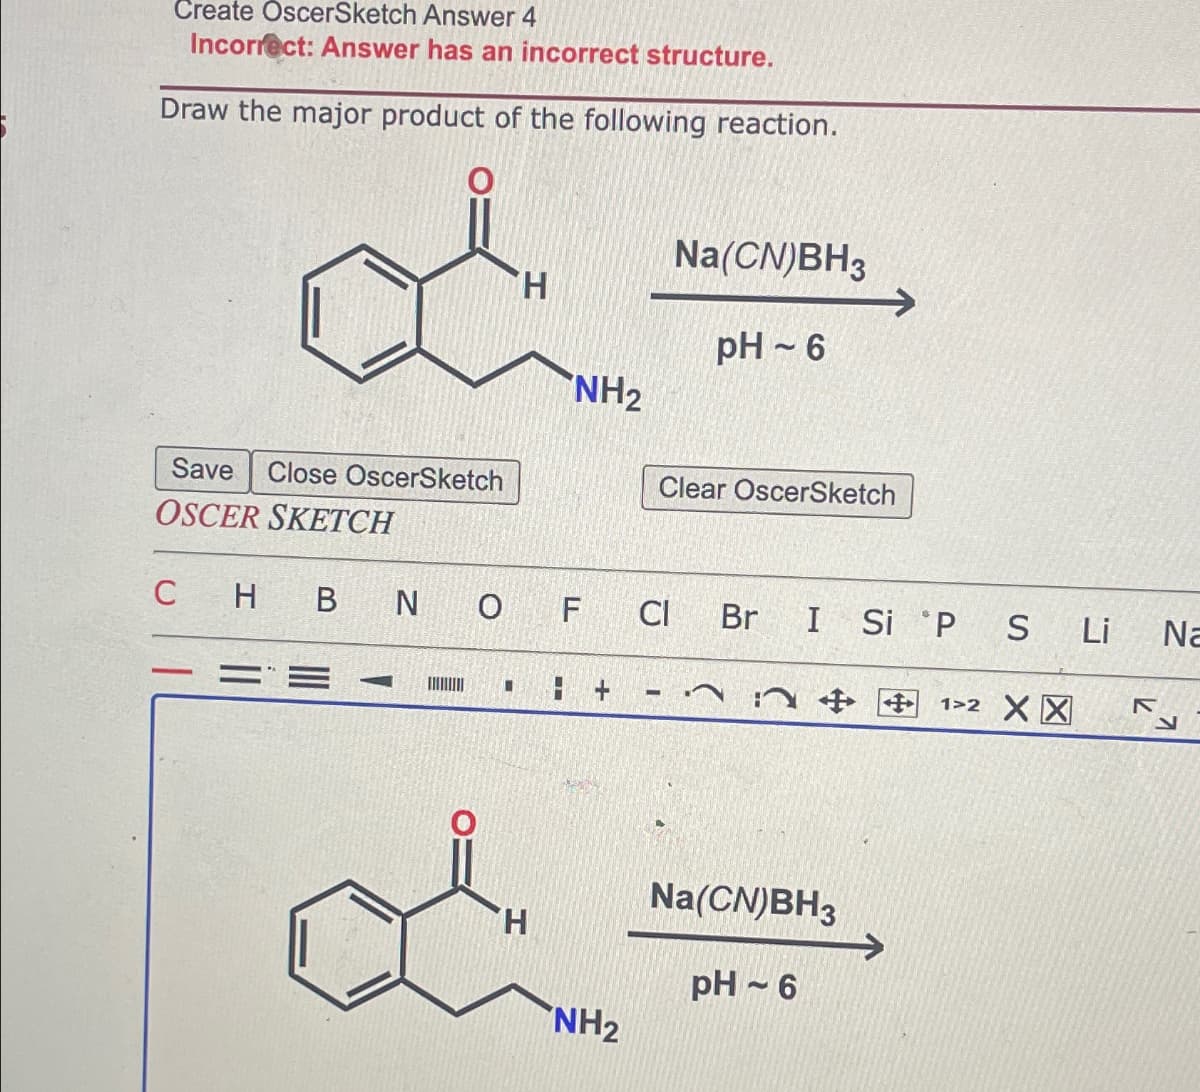 Create OscerSketch Answer 4
Incorrect: Answer has an incorrect structure.
Draw the major product of the following reaction.
Save Close OscerSketch
OSCER SKETCH
H
NH₂
H
CHB N O F CI
8 +
NH₂
Na(CN)BH3
pH-6
Clear OscerSketch
Br I Si P S Li Na
+ 12 XX
Na(CN)BH3
pH 6
K
N